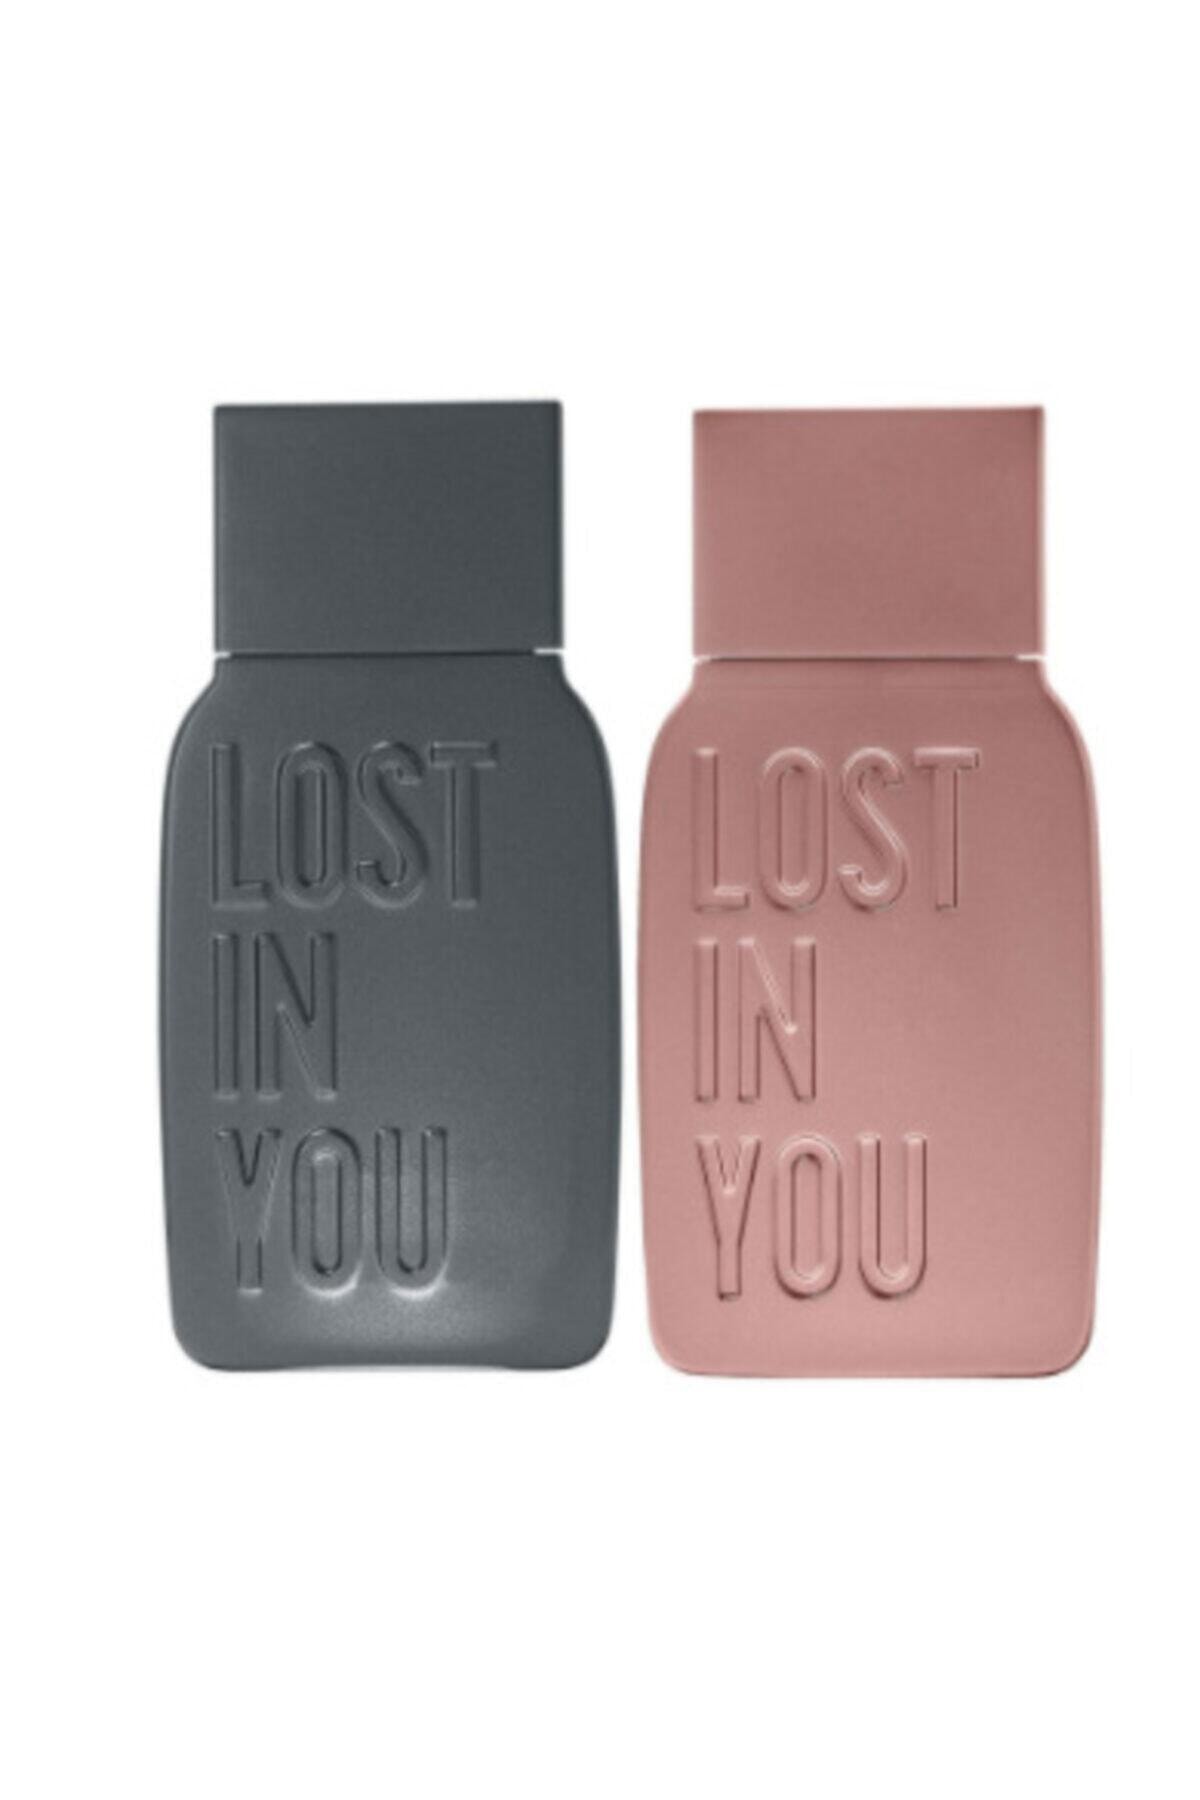 Oriflame Lost In You For Him 50ml + Lost In You For Her 50ml Ikili Set